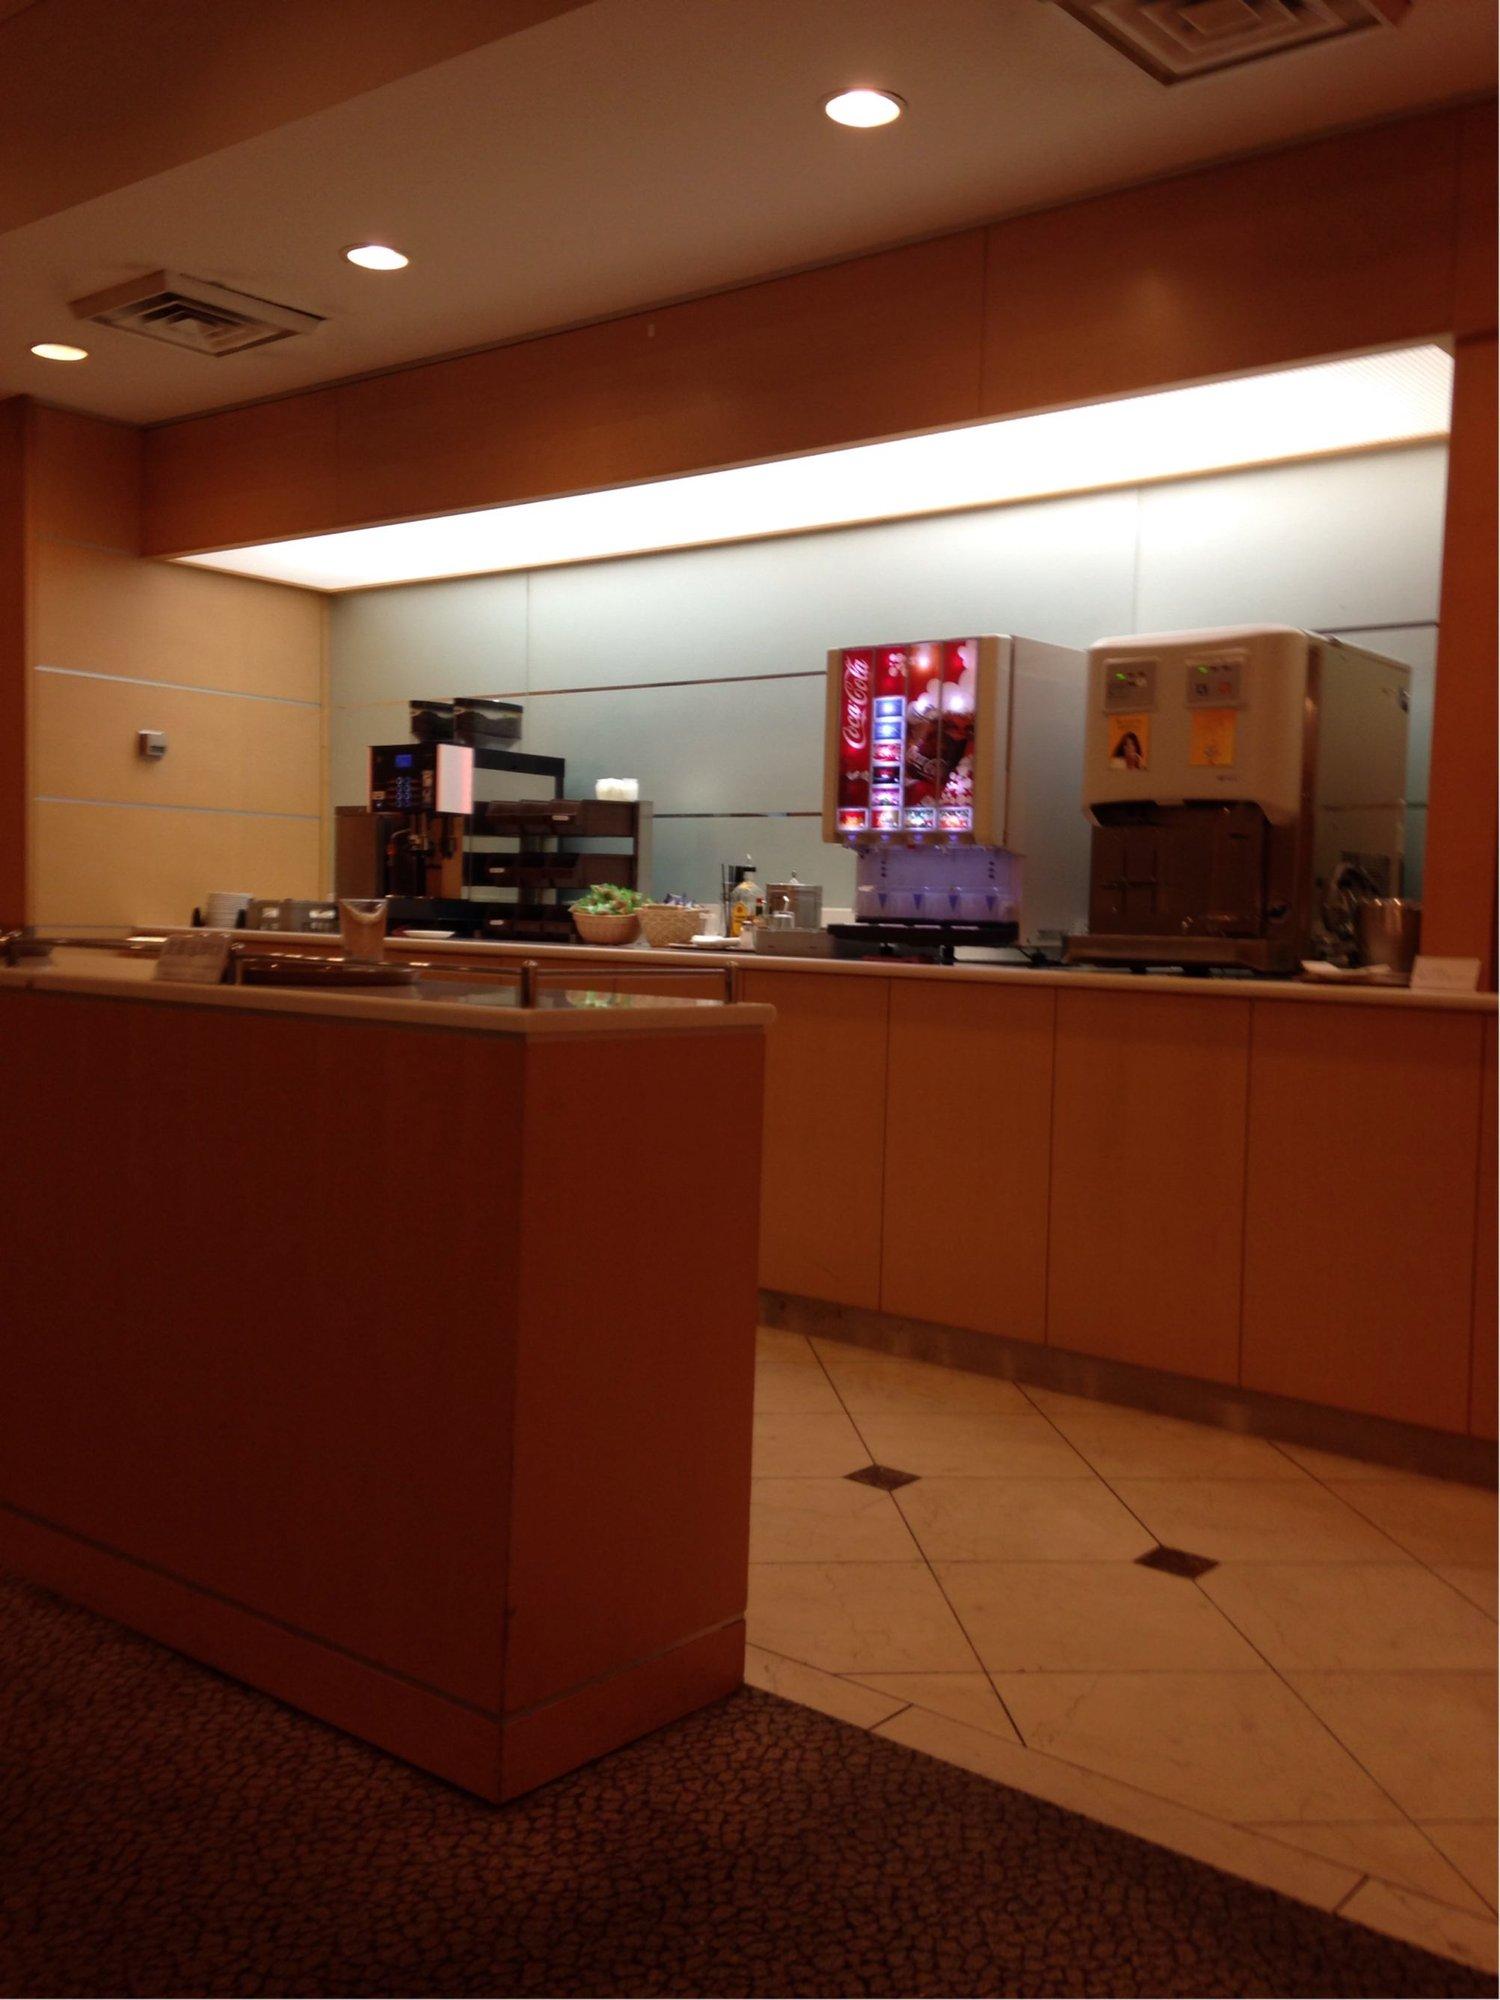 Centrair Airline Lounge image 1 of 5